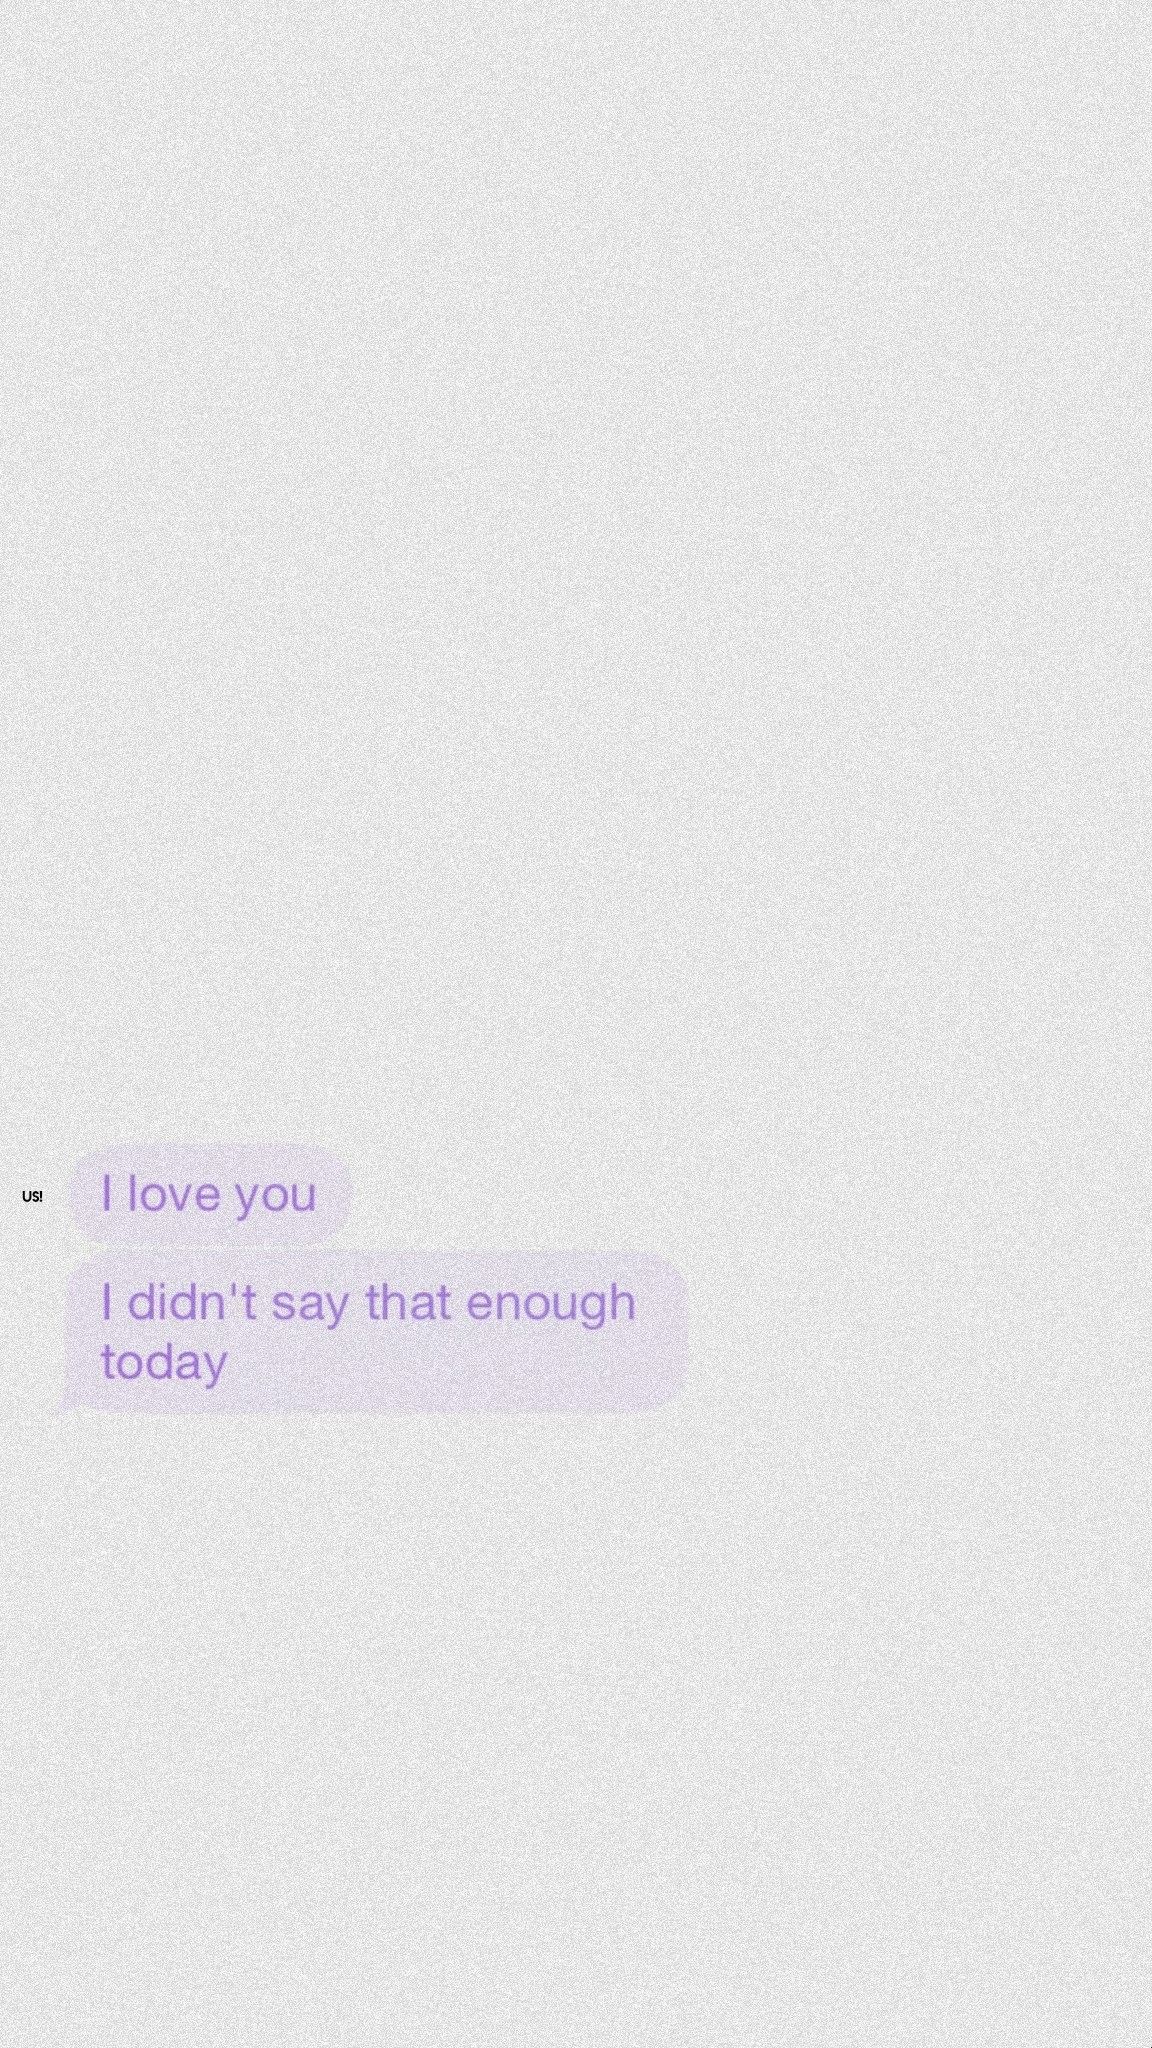 sad text messages wallpaper by aestheticdaydream  Download on ZEDGE  8bcb